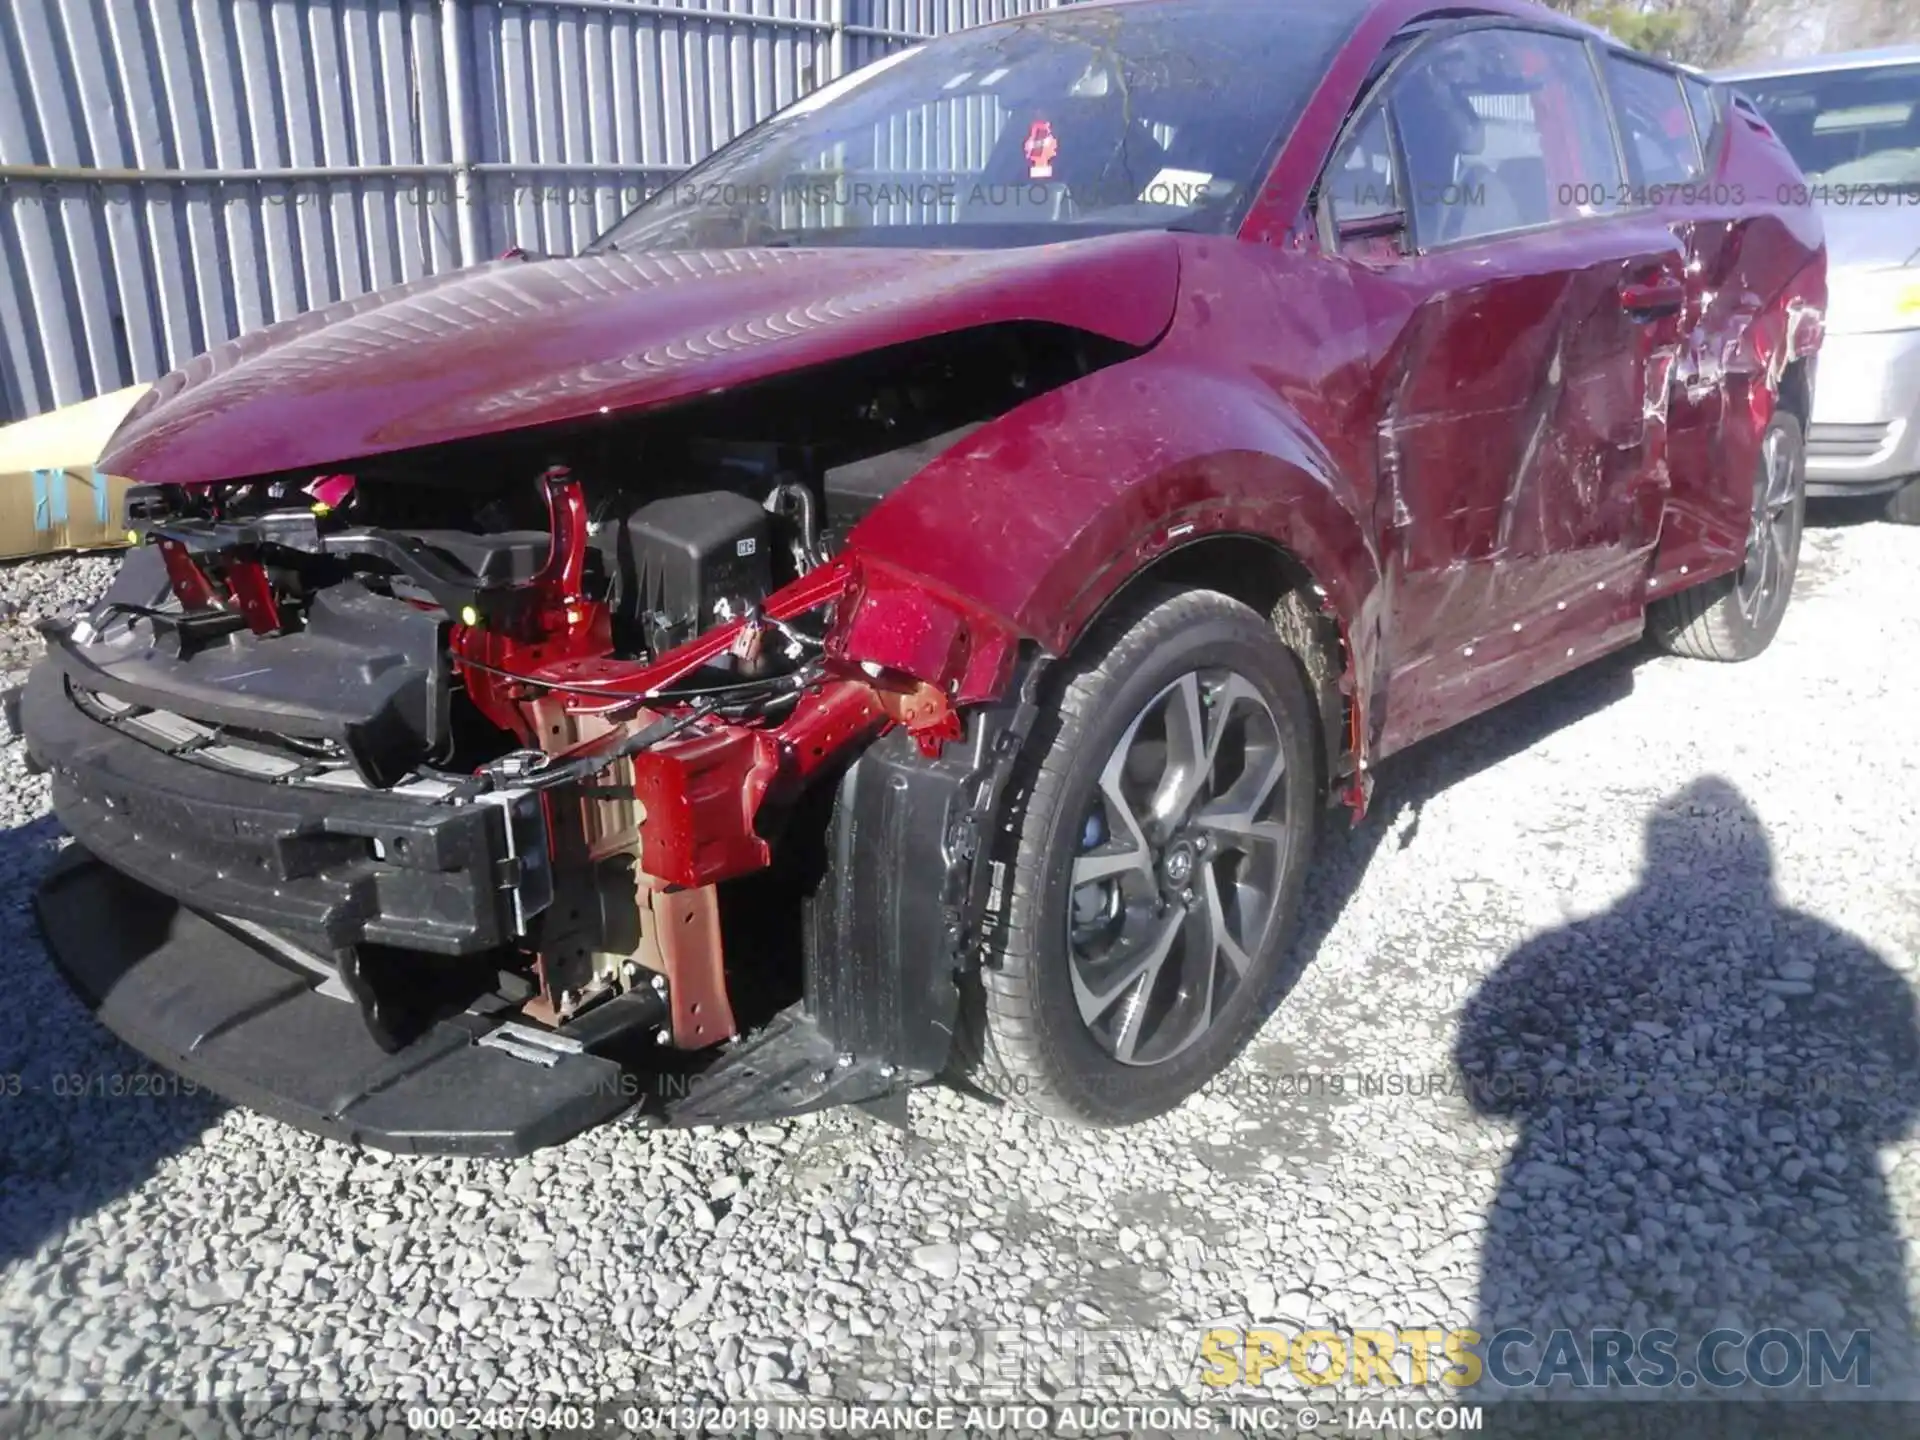 6 Photograph of a damaged car NMTKHMBXXKR081980 TOYOTA C-HR 2019